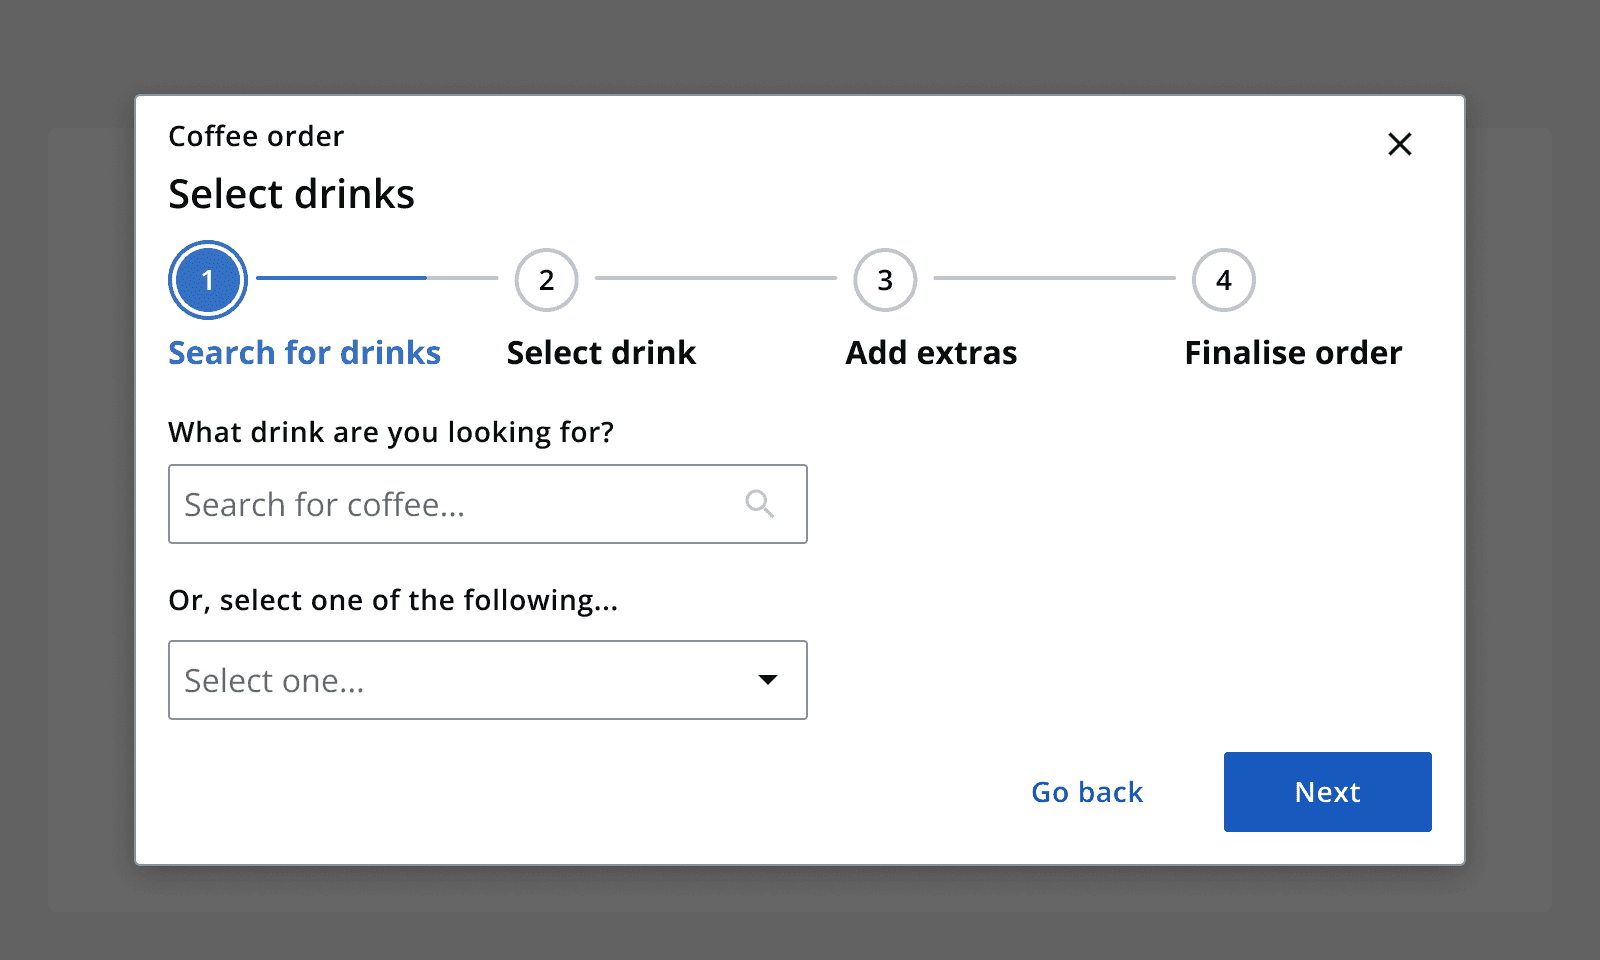 An example dialog containing a multi-step form for selecting and adding drinks to an order. A stepper with four steps is used with multiple form elements inside each step.